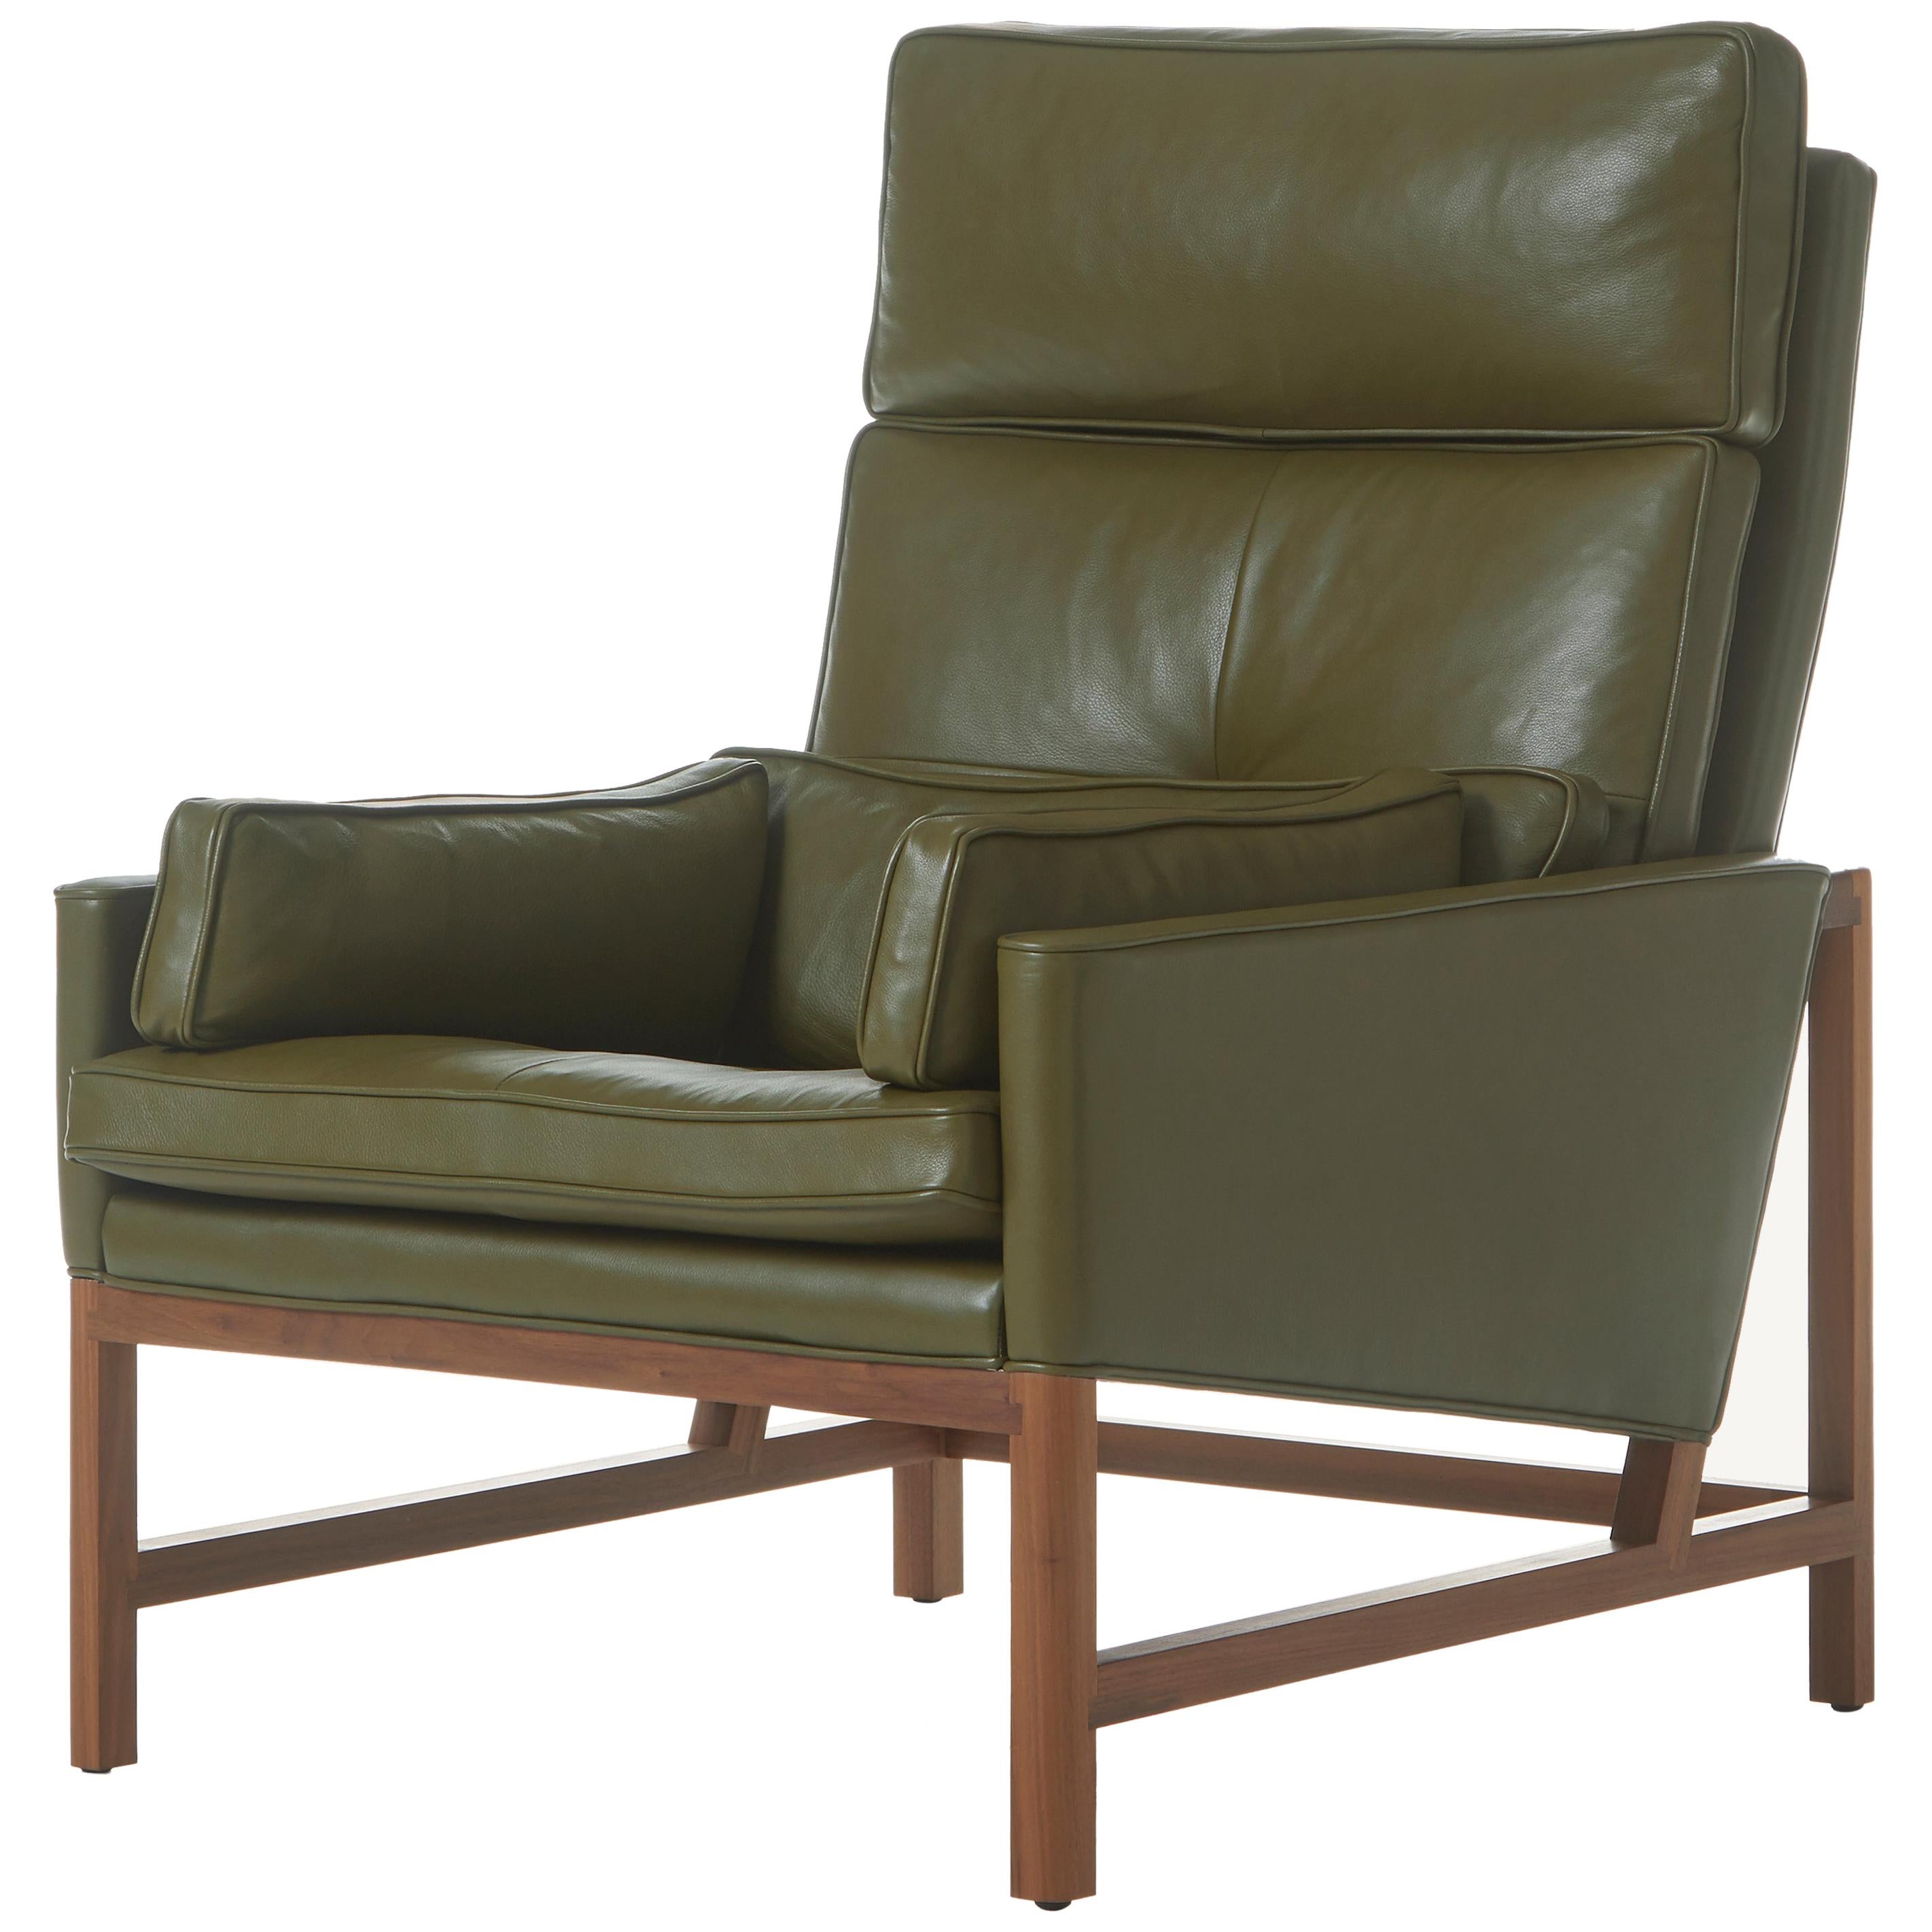 Wood Frame High Back Lounge Chair in Walnut and Leather Designed by Craig Bassam